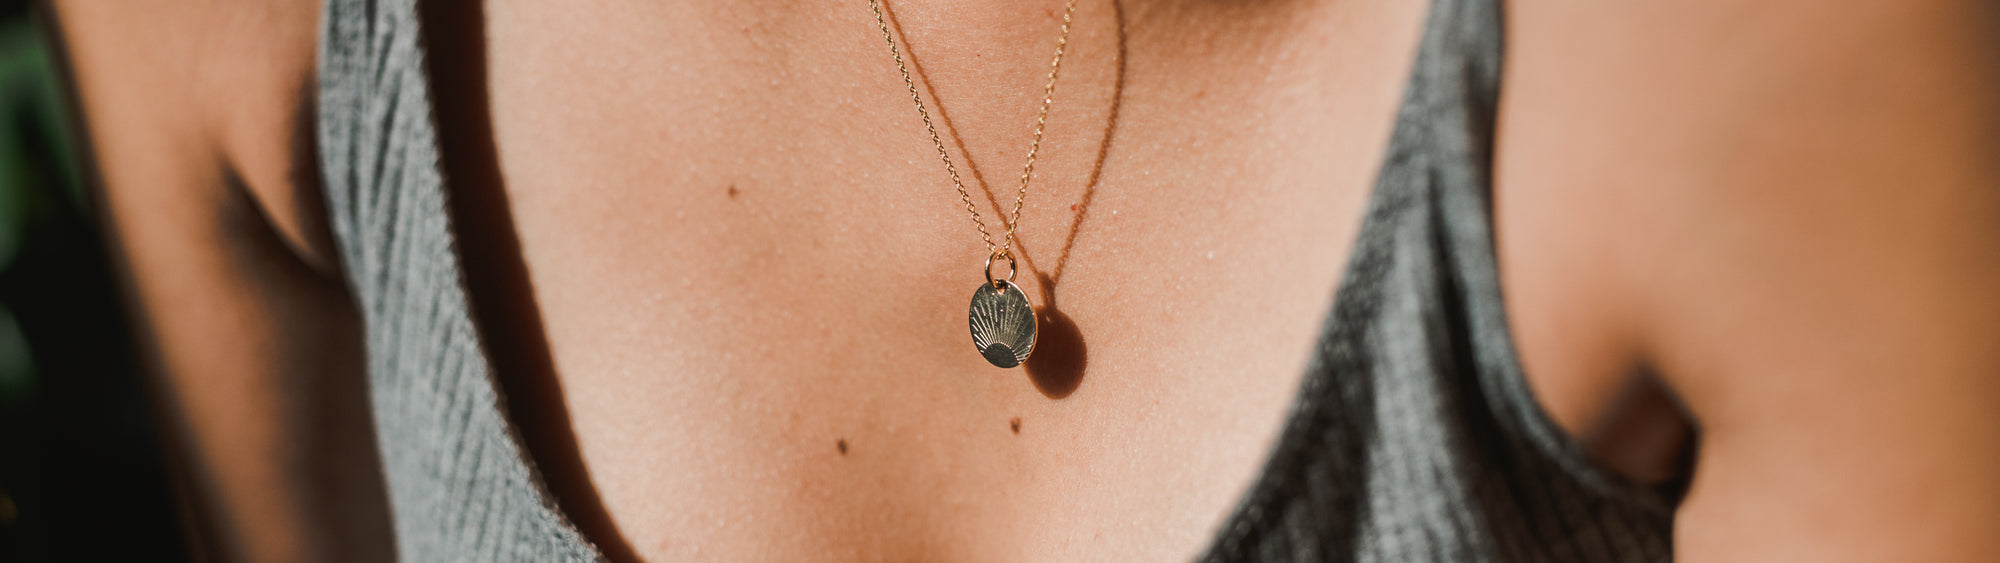 Close-up of a necklace with a small, oval pendant on a woman wearing a gray tank top, focused on the chest area with a blurred background.